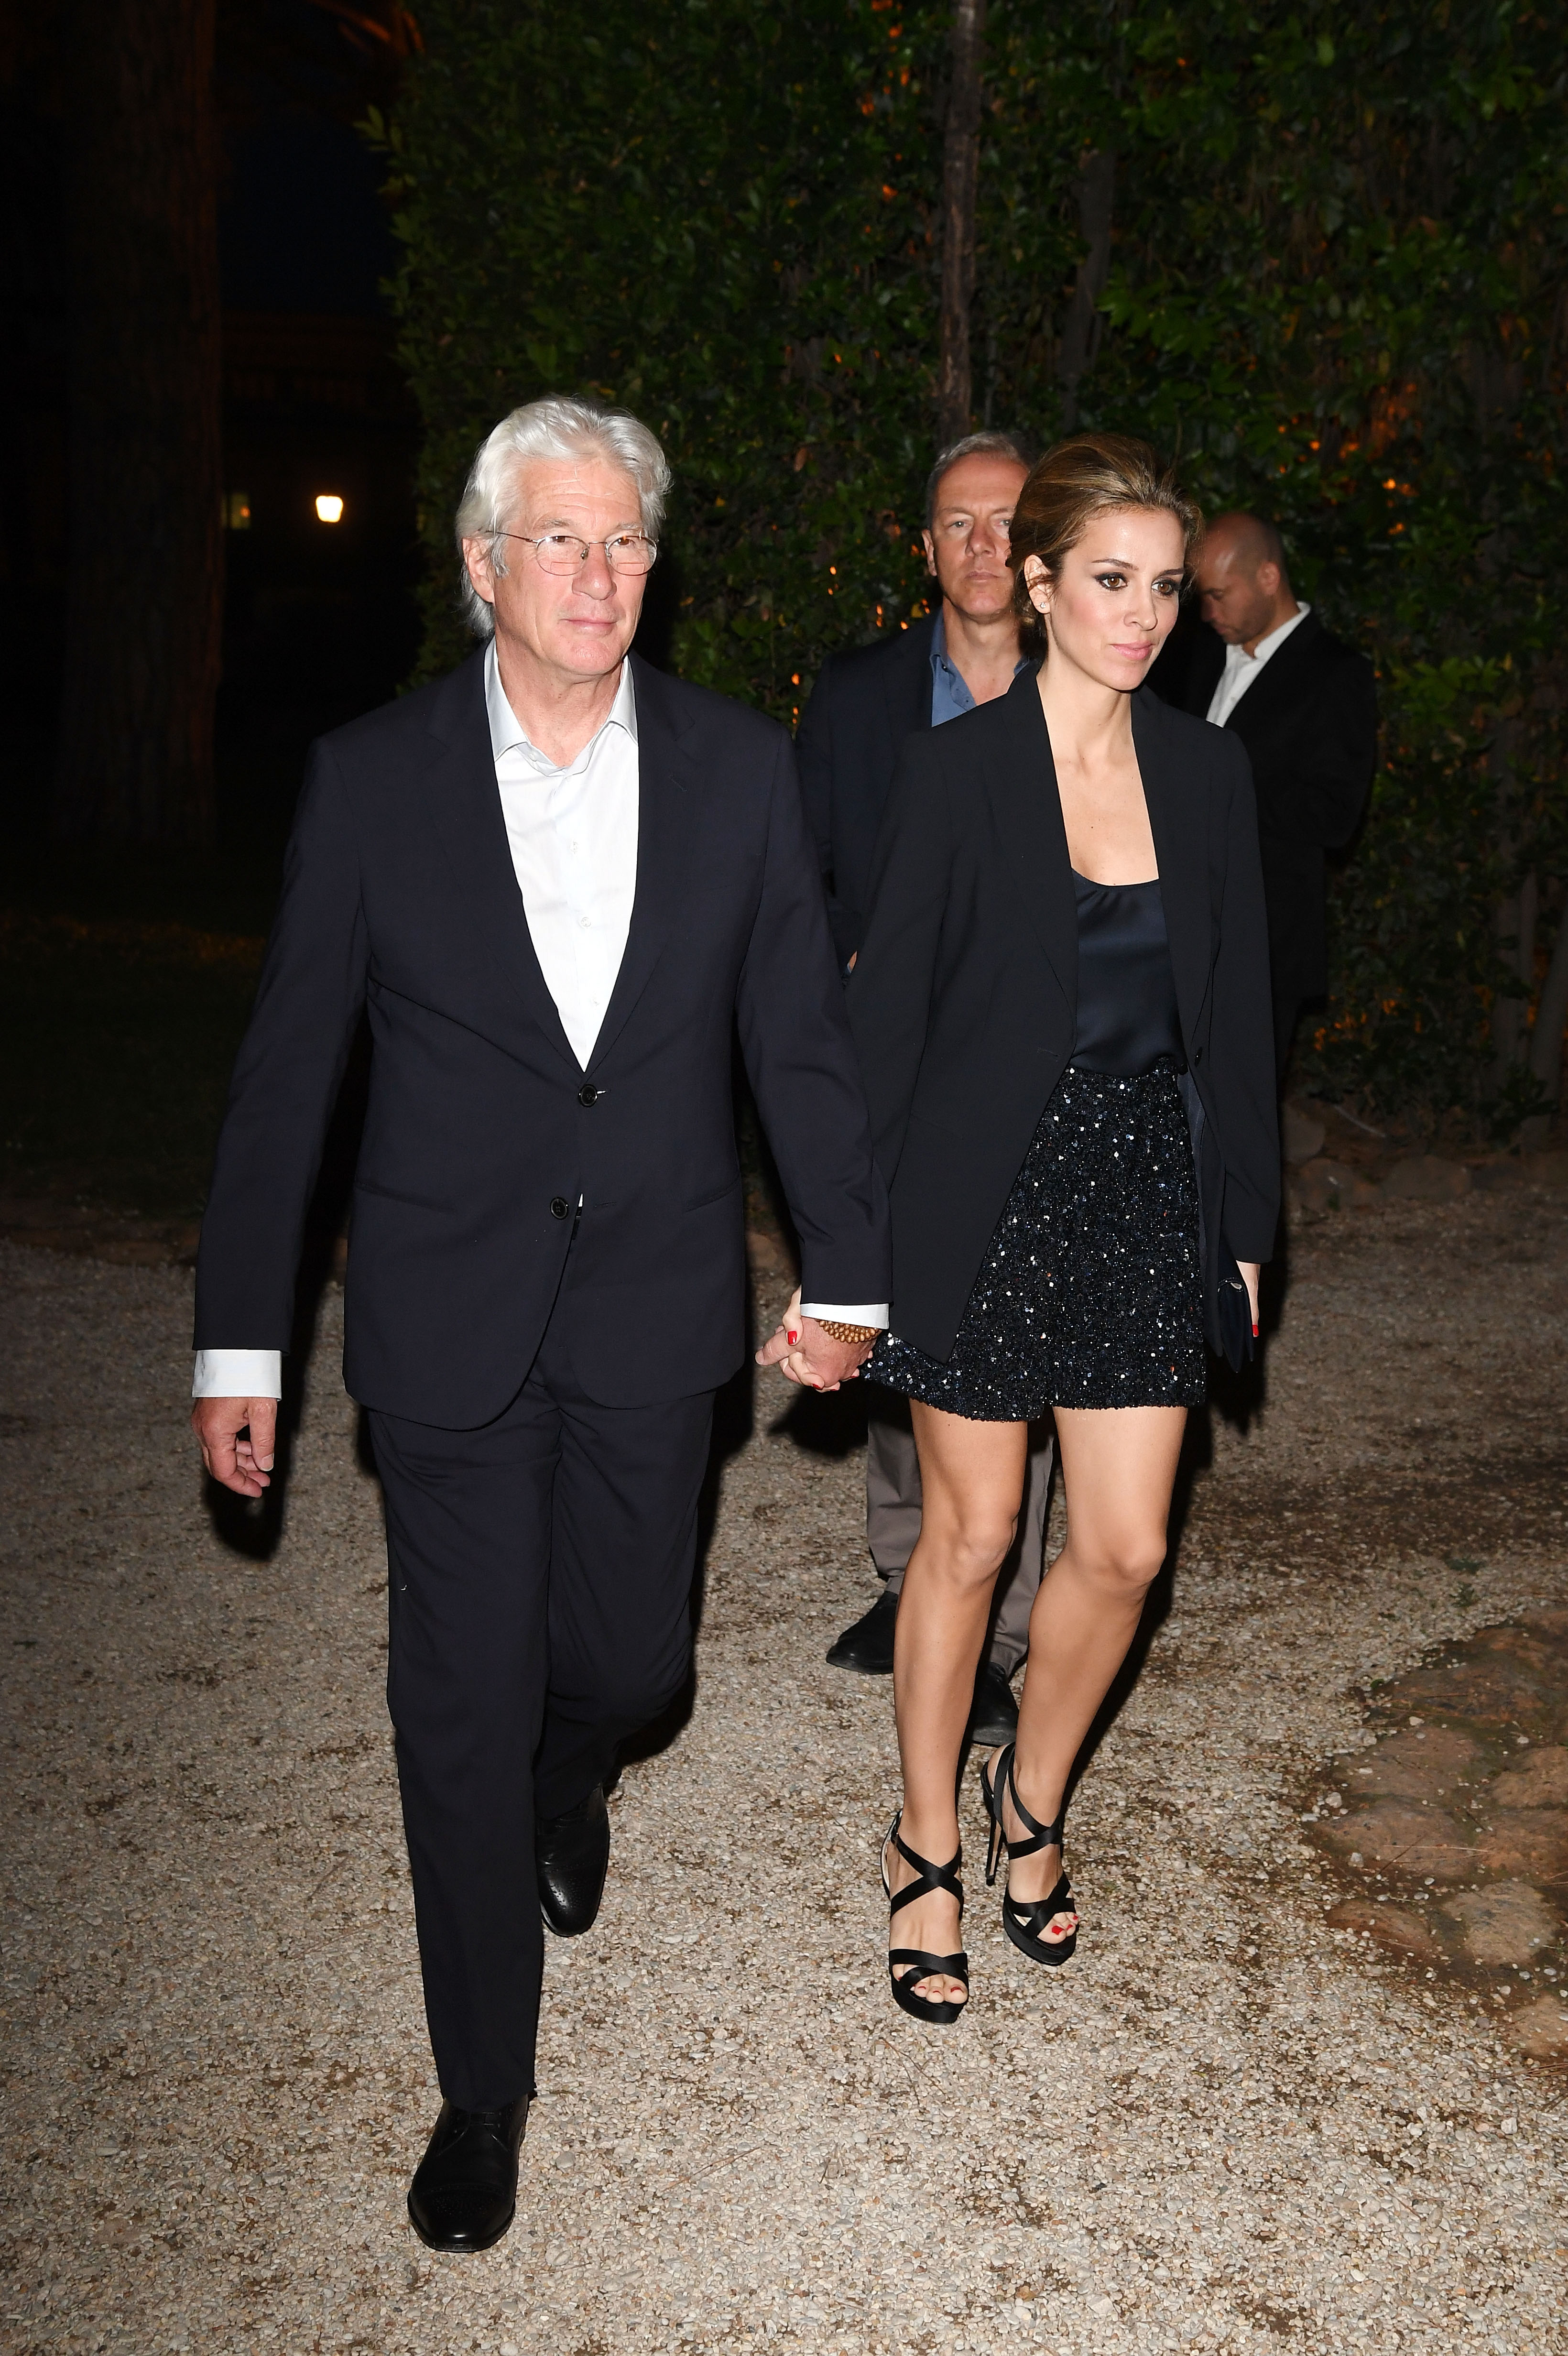 Alejandra Silva and Richard Gere attend McKim Medal Gala In Rome on June 9, 2016 in Rome, Italy | Source: Getty Images